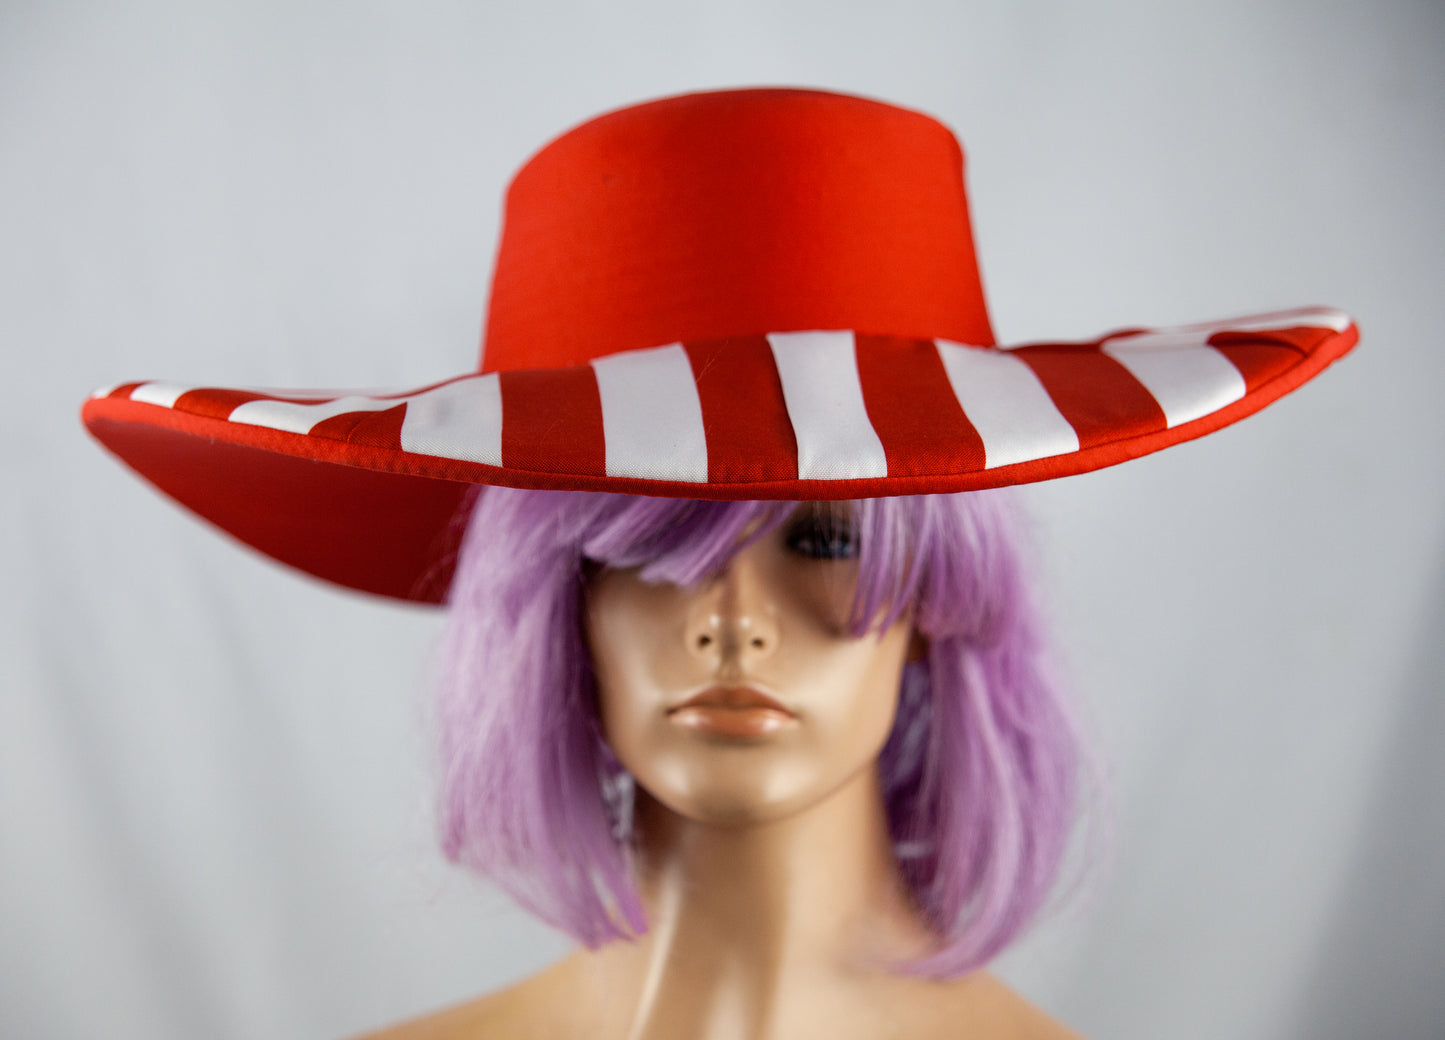 Durban July Fashion Hat - red with white stripes on brim